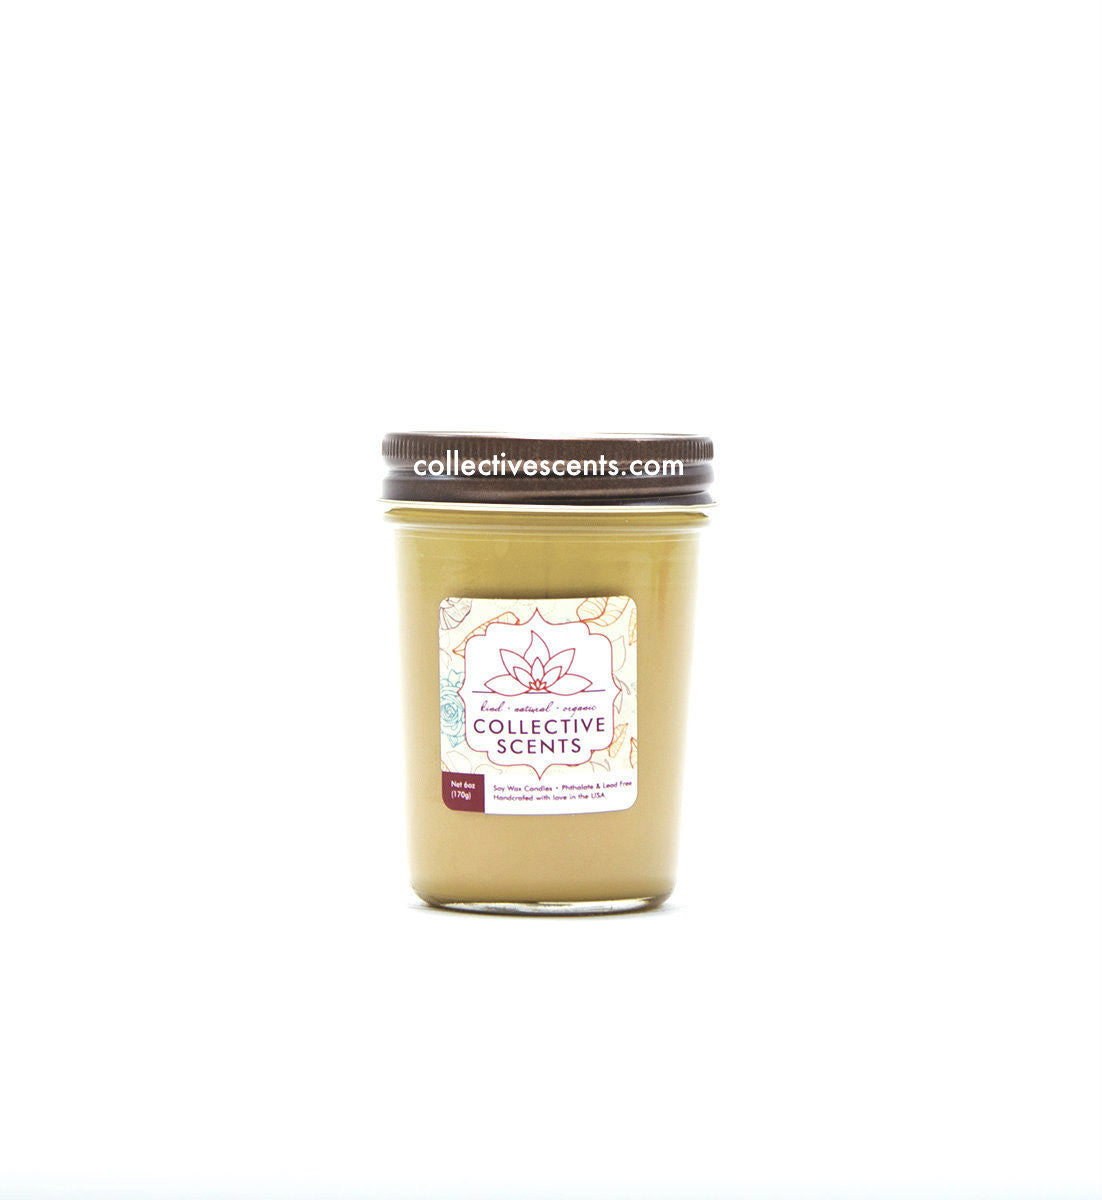 A scent of freshly baked apples in  sweet cream smothered with butter and a touch of cinnamon brings a sweet smelling apple pie in your home. A popular holiday soy candle scent/Collectivescents.com